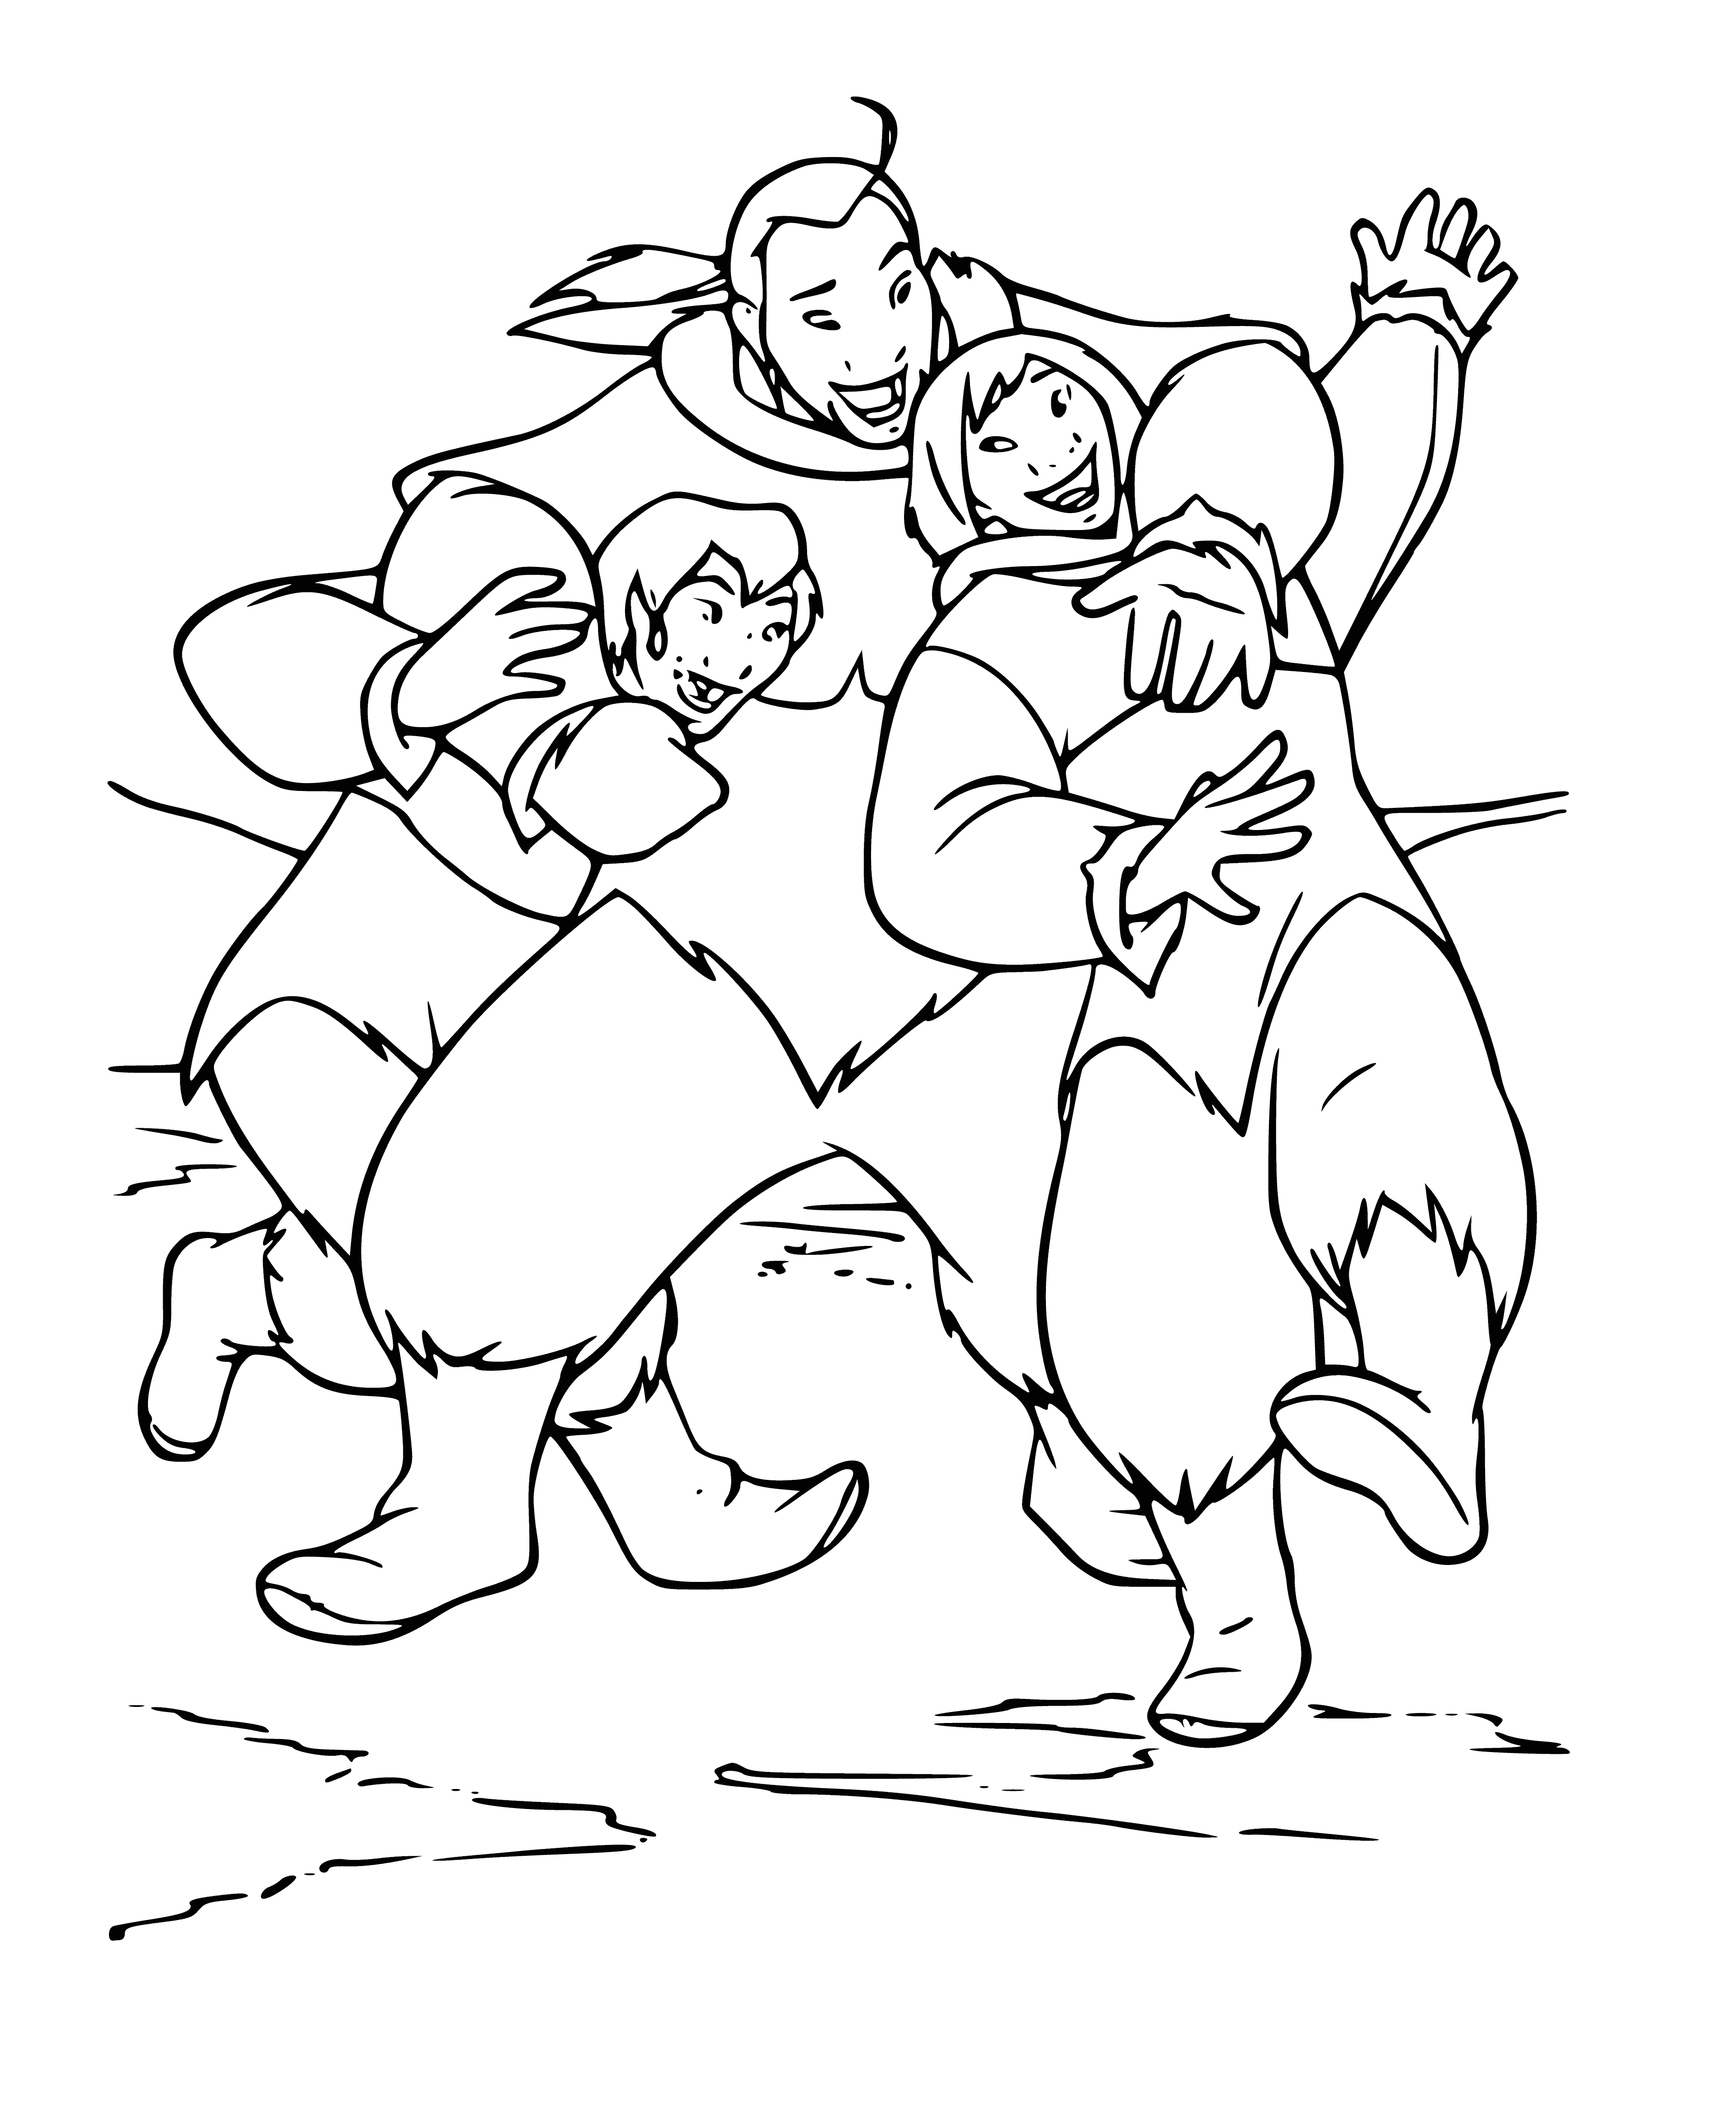 Three brothers coloring page